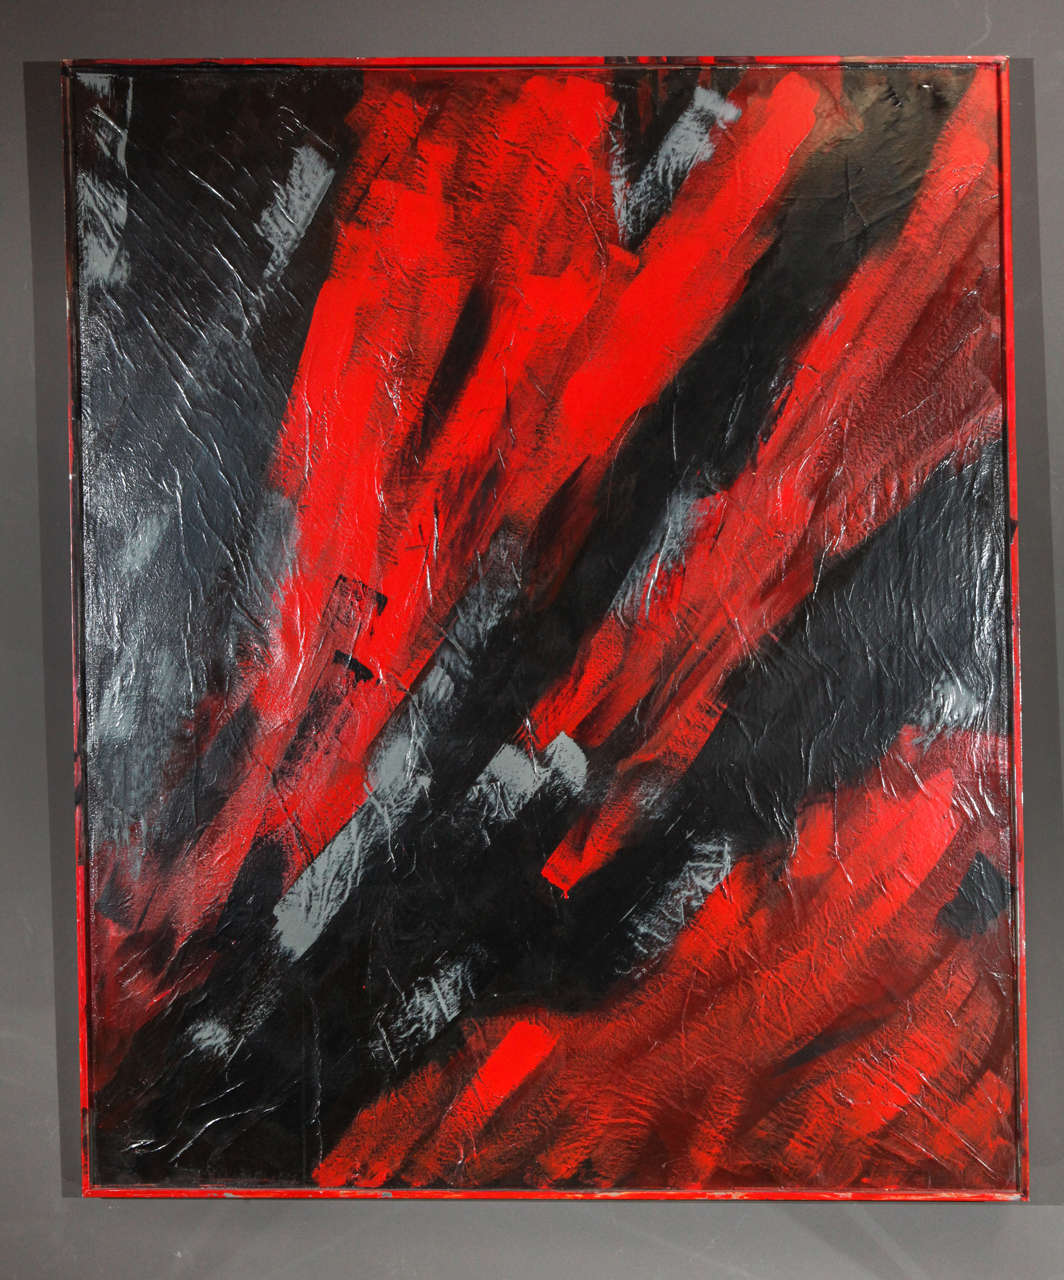 Black, Red and Grey abstract oil painting on canvas.  Enclosed in a painted metal frame.